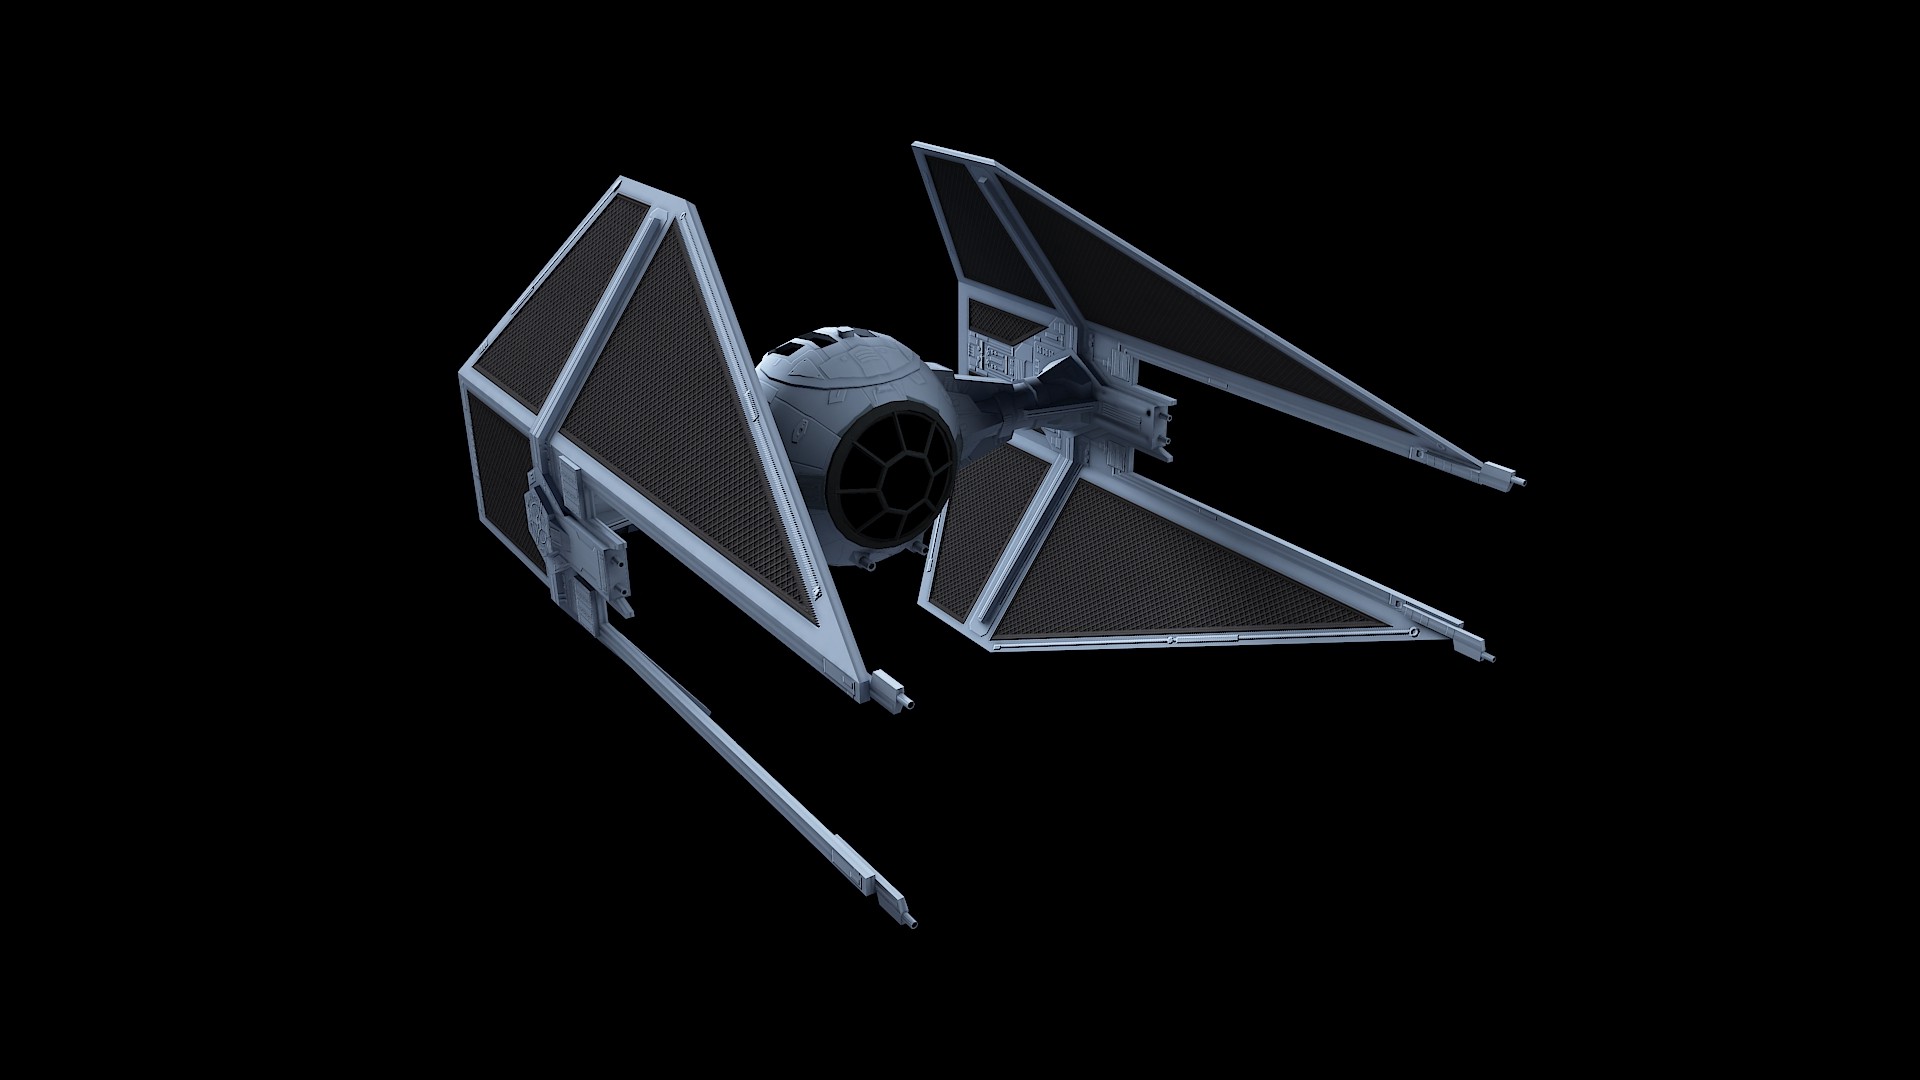 2 Star Wars TIE Fighter HD Wallpapers Backgrounds